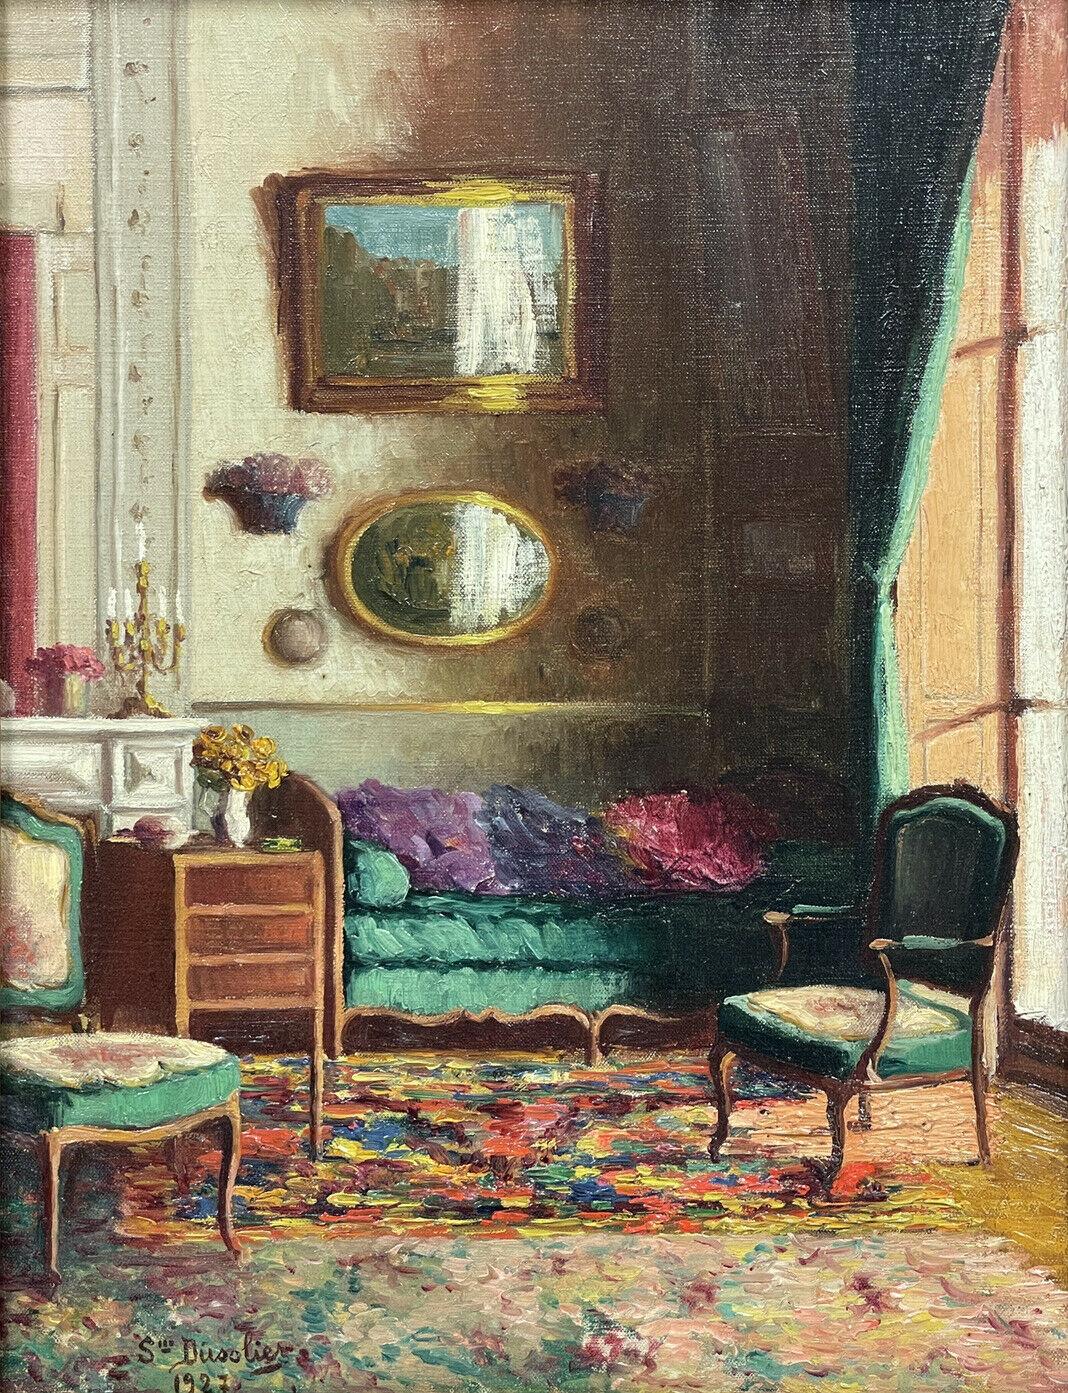 Artist/ School/ Date:
French School, 1920'S indistinctly signed and dated 1927

Title:
The Salon Interior. Painted with beautiful light and attention to detail.

Medium & Size:
oil painting on canvas: 14 x 10.75 inches, framed 18.5 x 15